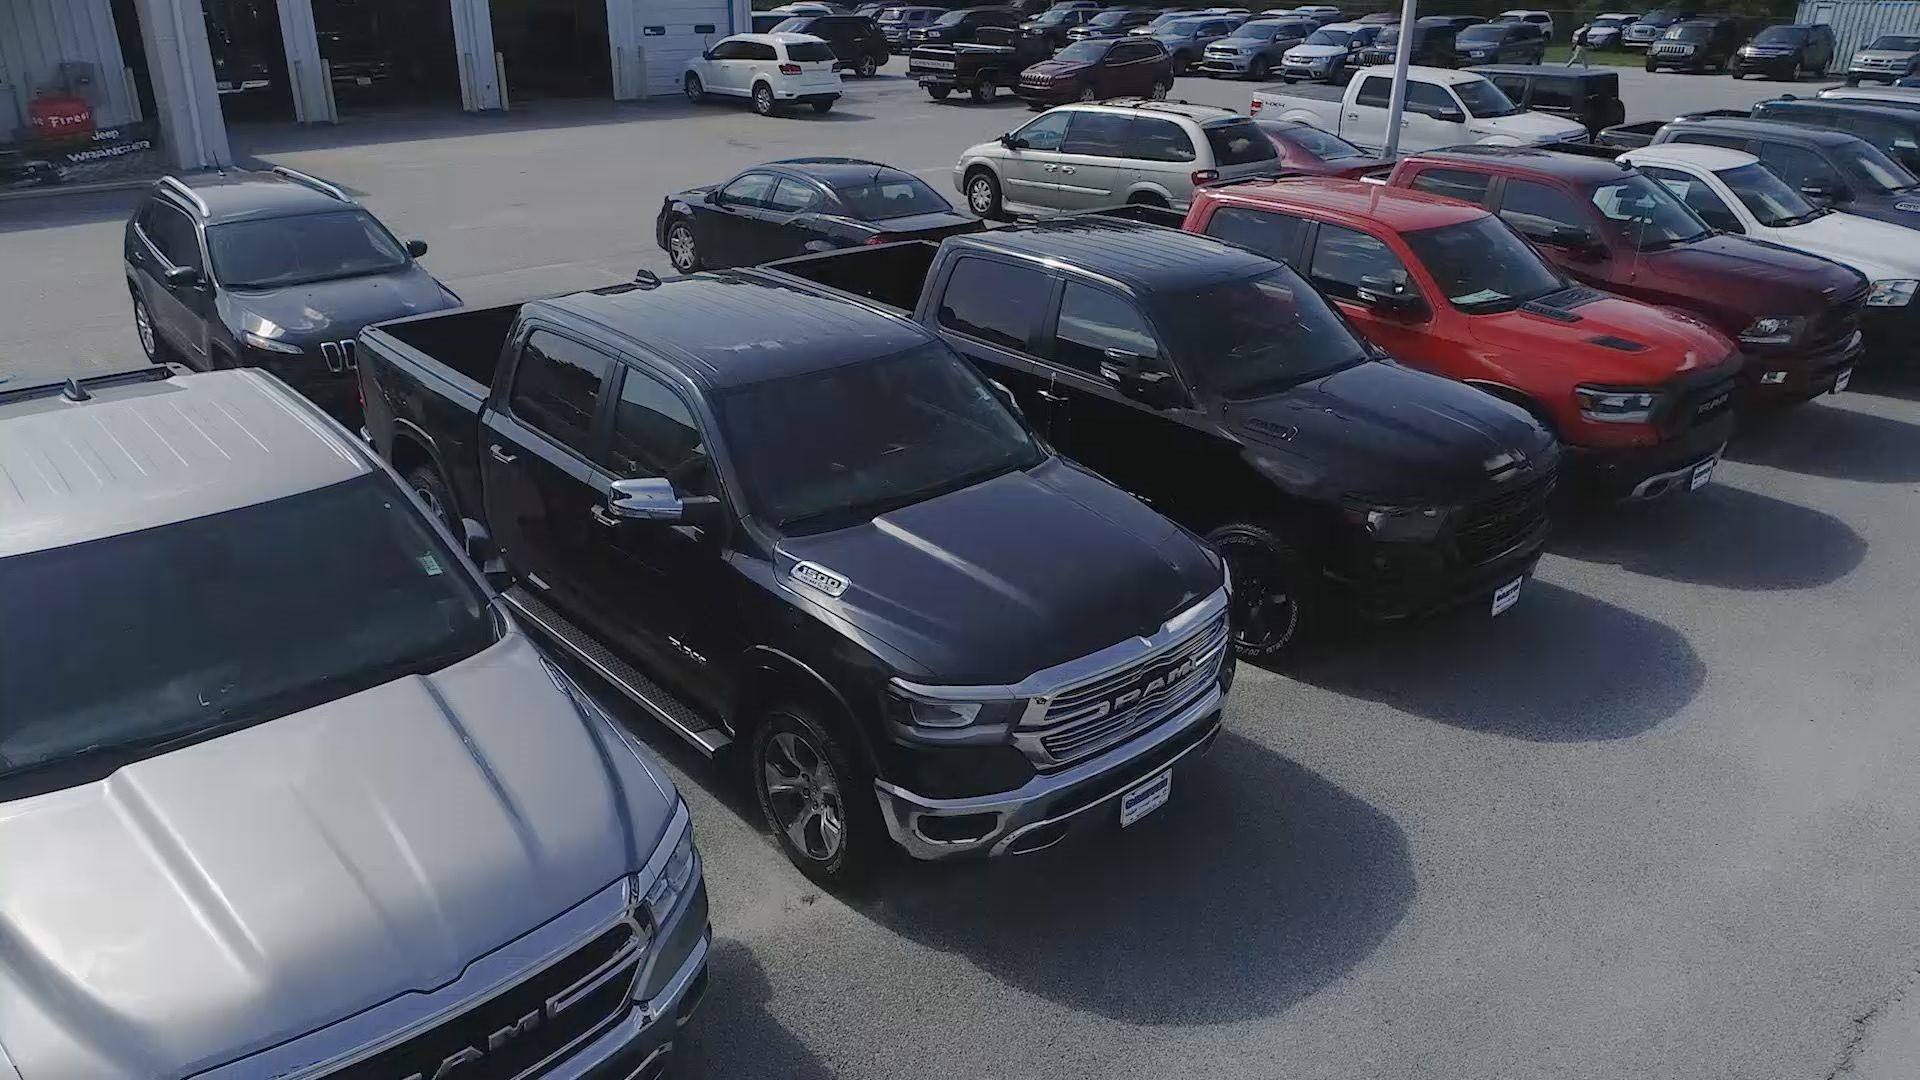 Santee Automotive in Manning, SC treats the needs of each individual customer with paramount concern. We know that you have high expectations, and as a car dealer we enjoy the challenge of meeting and exceeding those standards each and every time. Allow us to demonstrate our commitment to excellence!